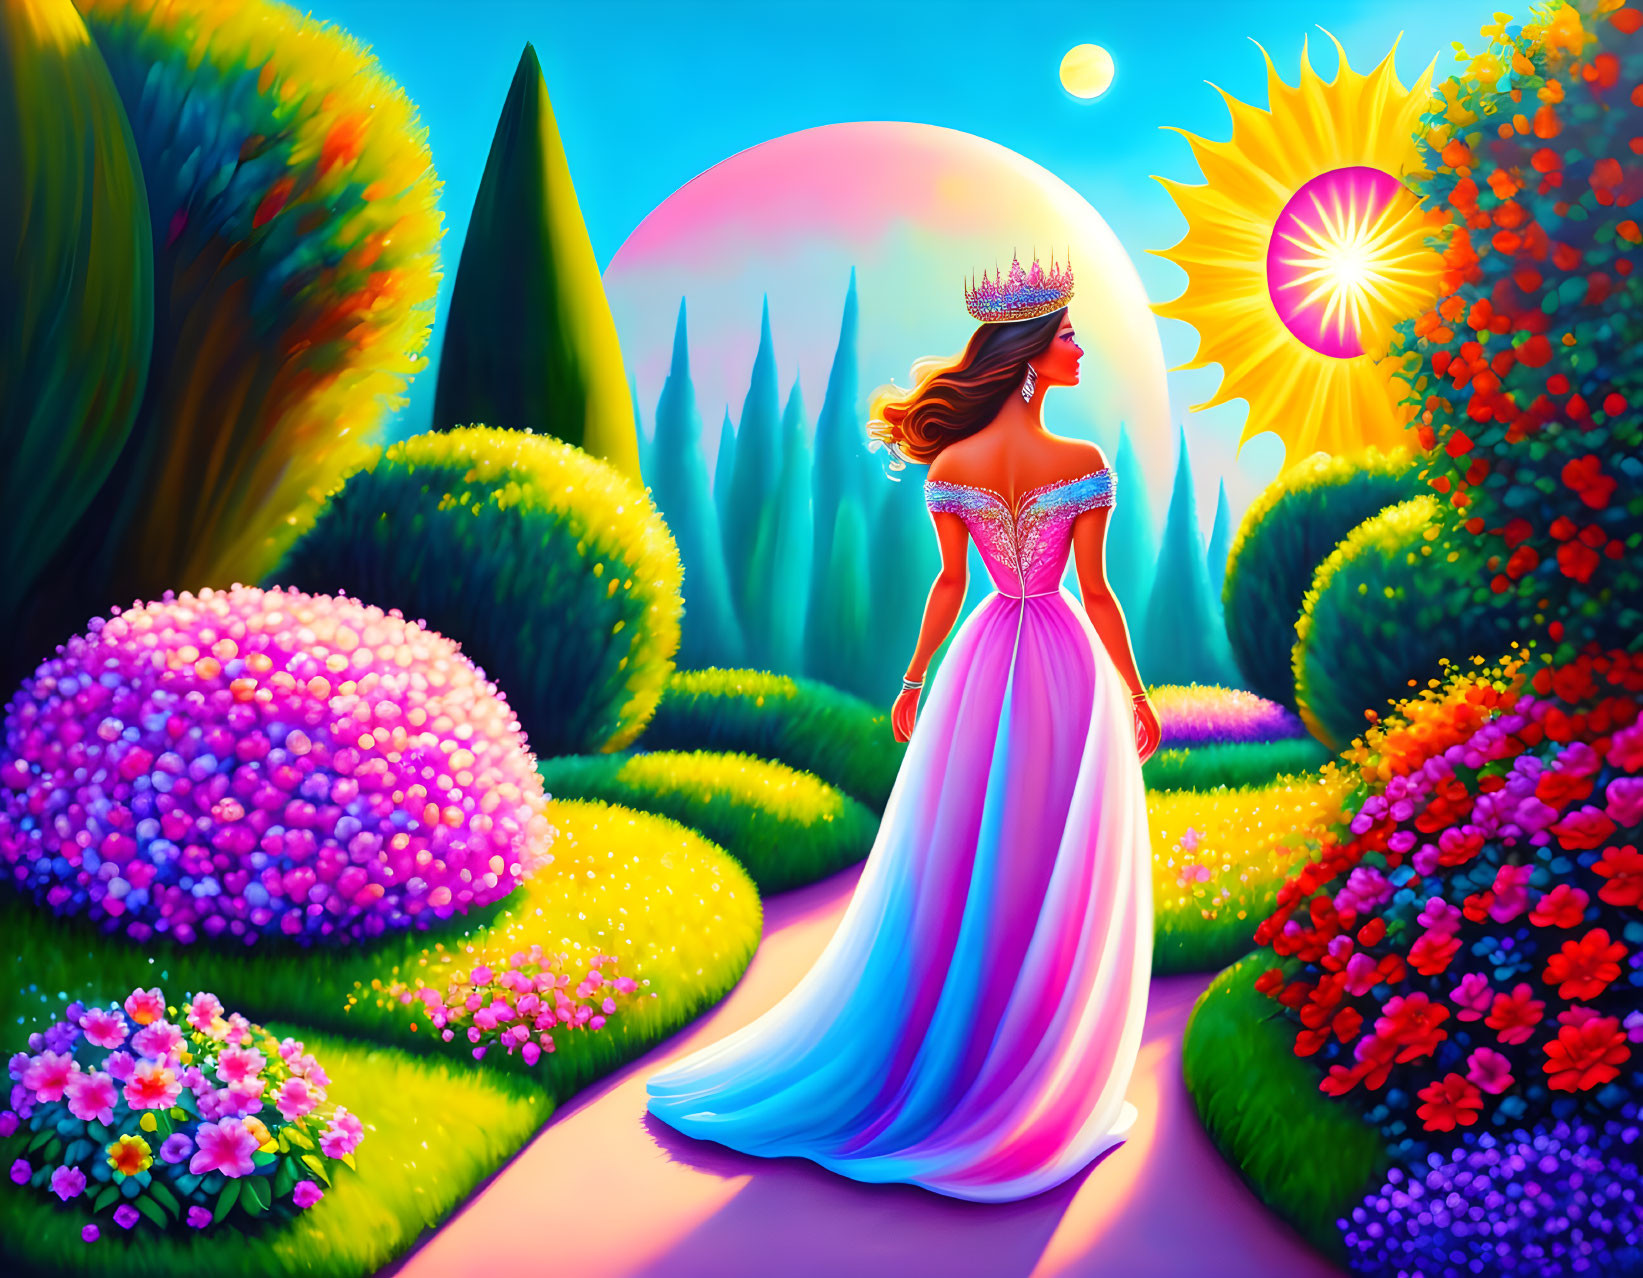 Colorful Princess Walking in Garden Path at Sunset